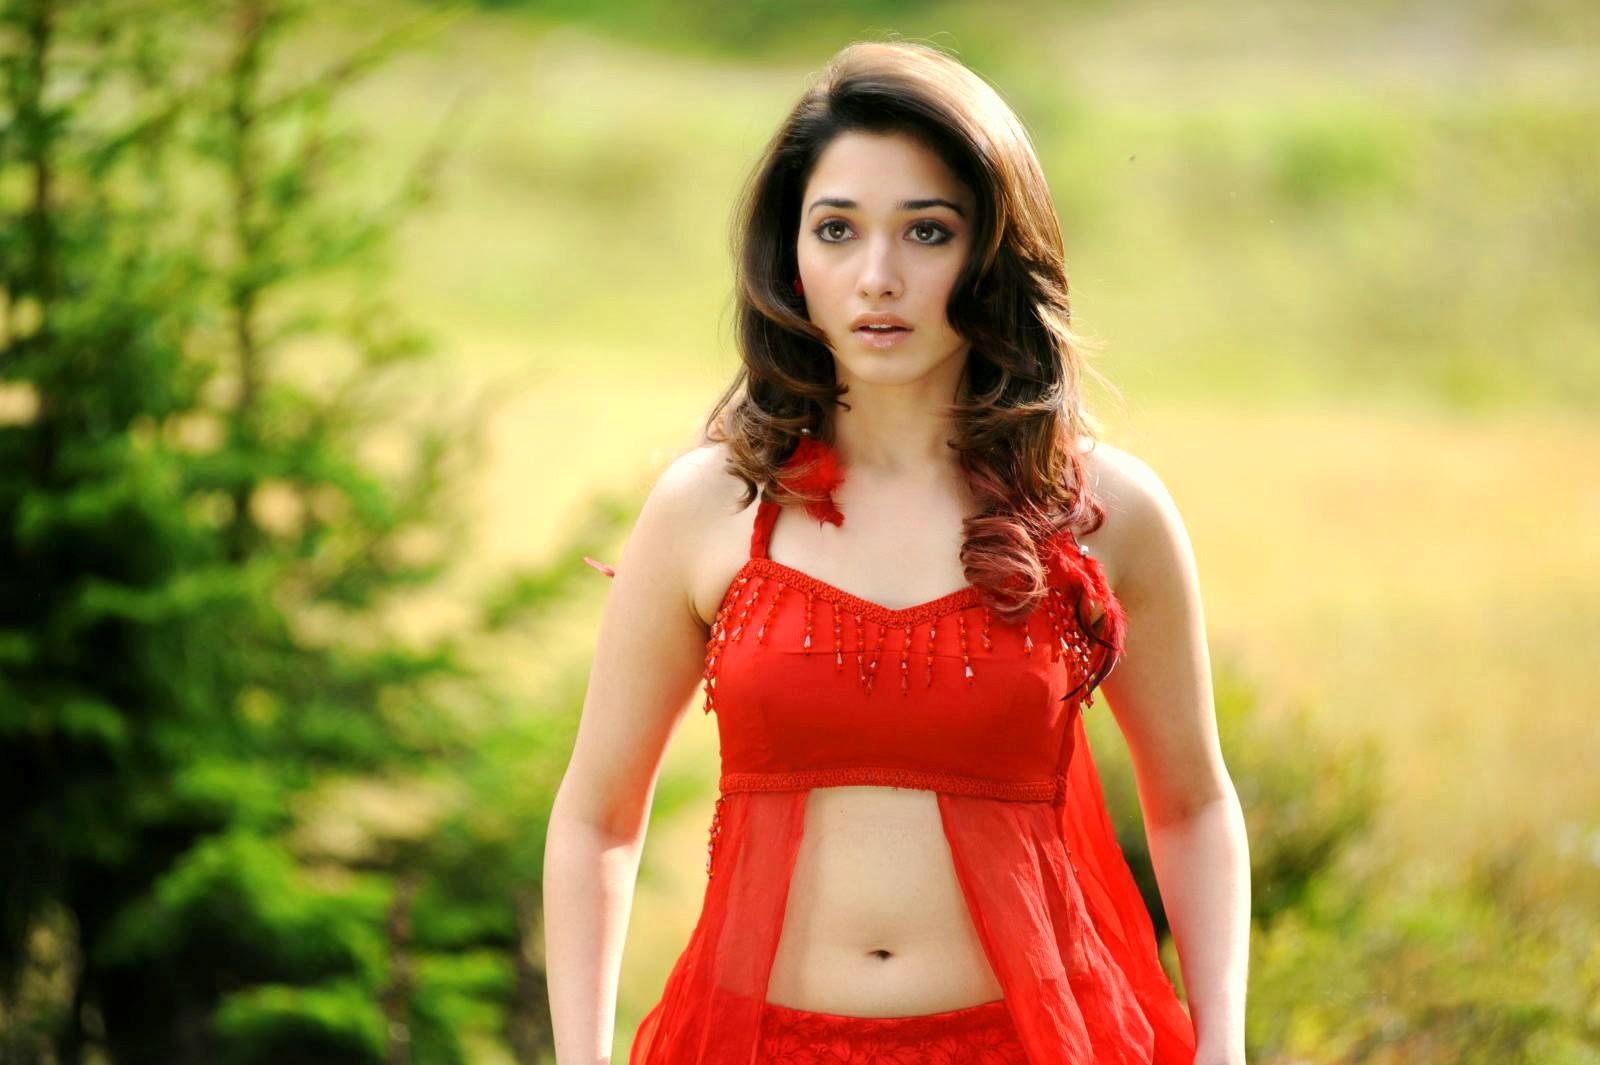 Sexy Tamanna Bhatia Red Dress Free Images